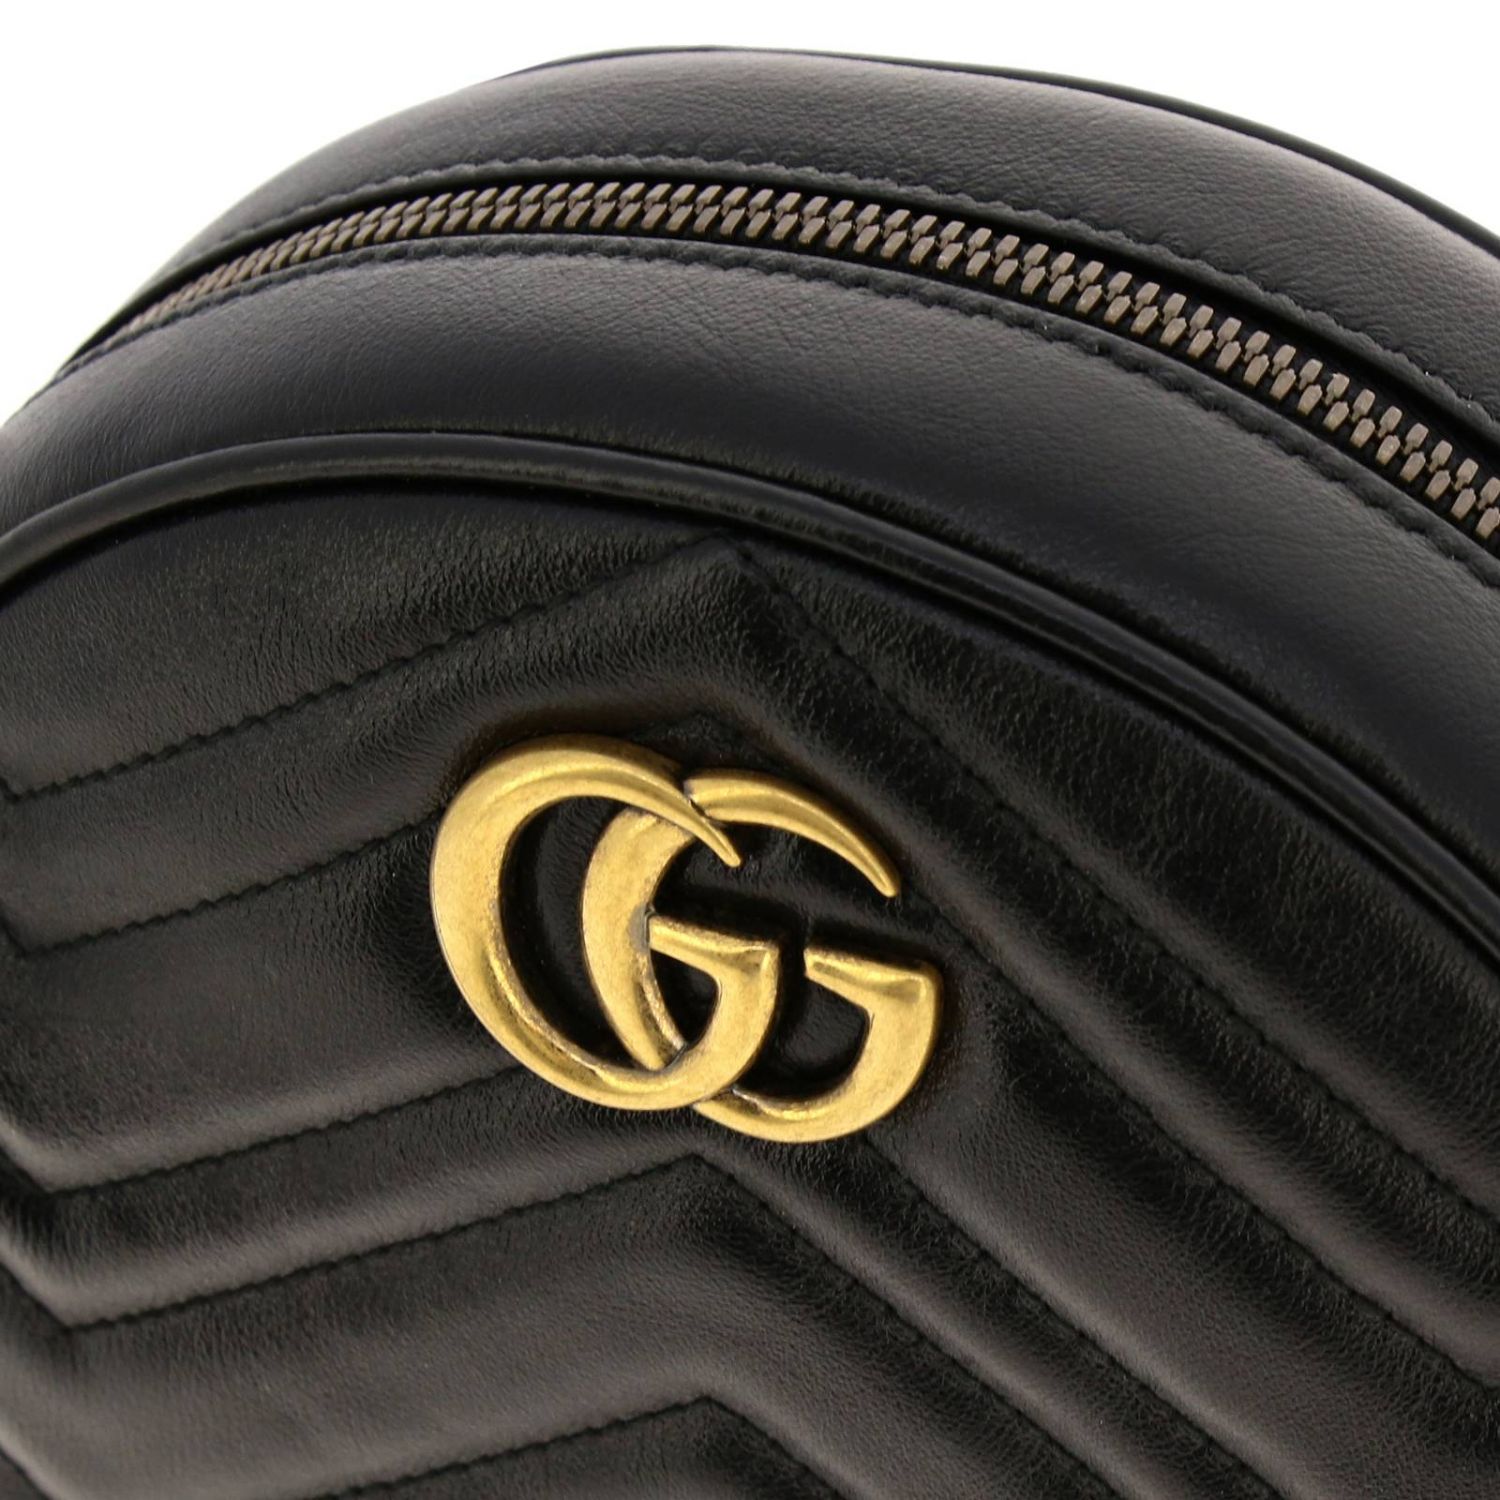 GUCCI: GG Marmont disco bag in quilted leather - Black | Gucci mini bag ...